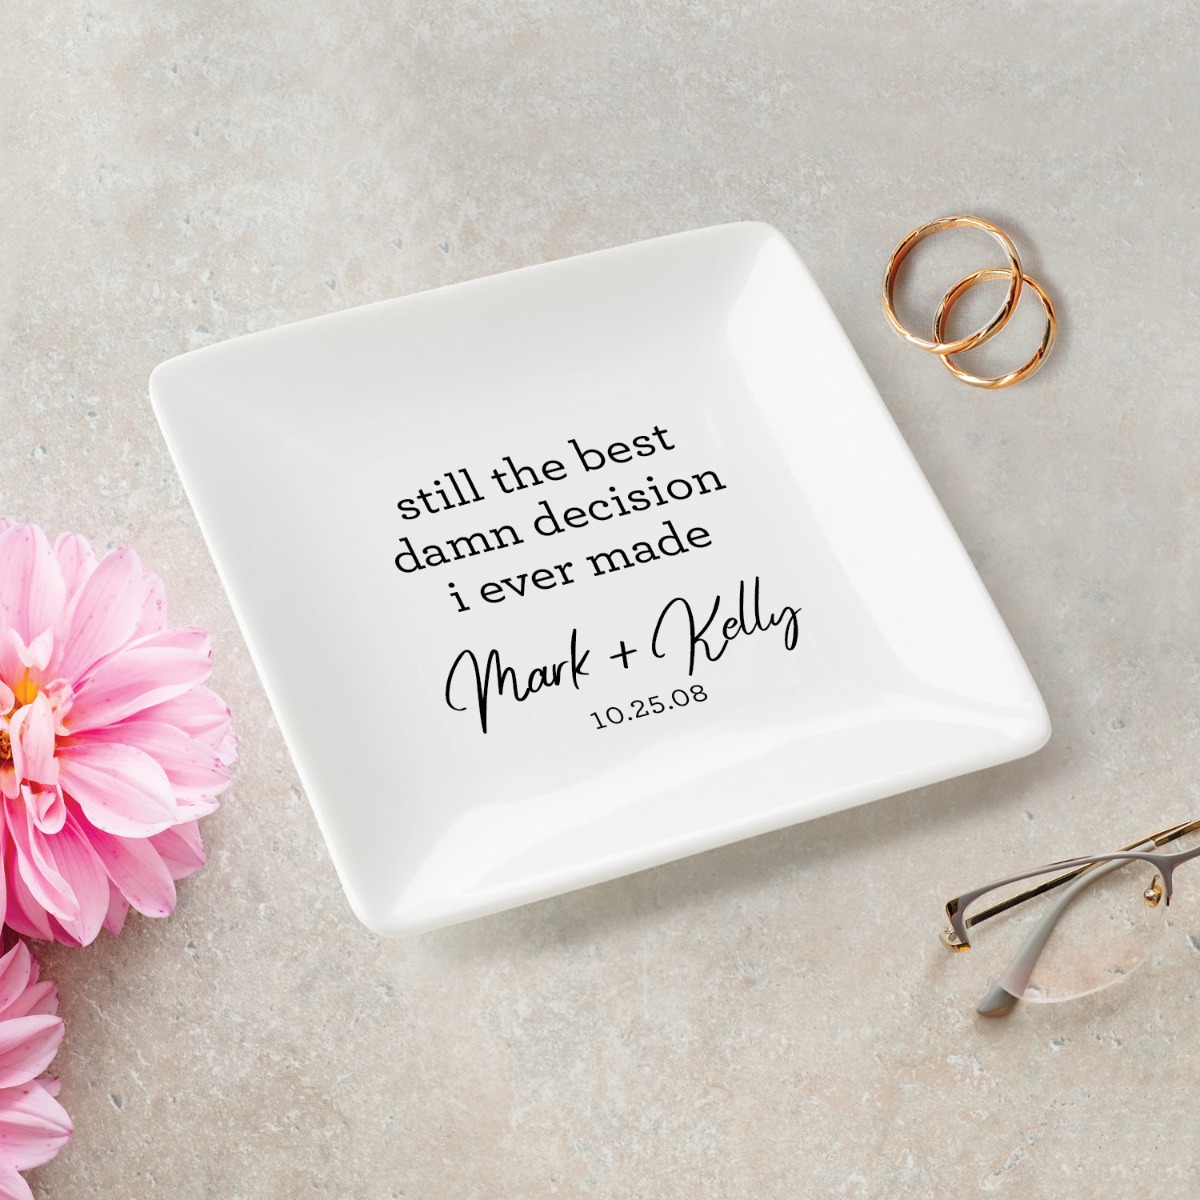 Best Decision Personalized Square Trinket Dish